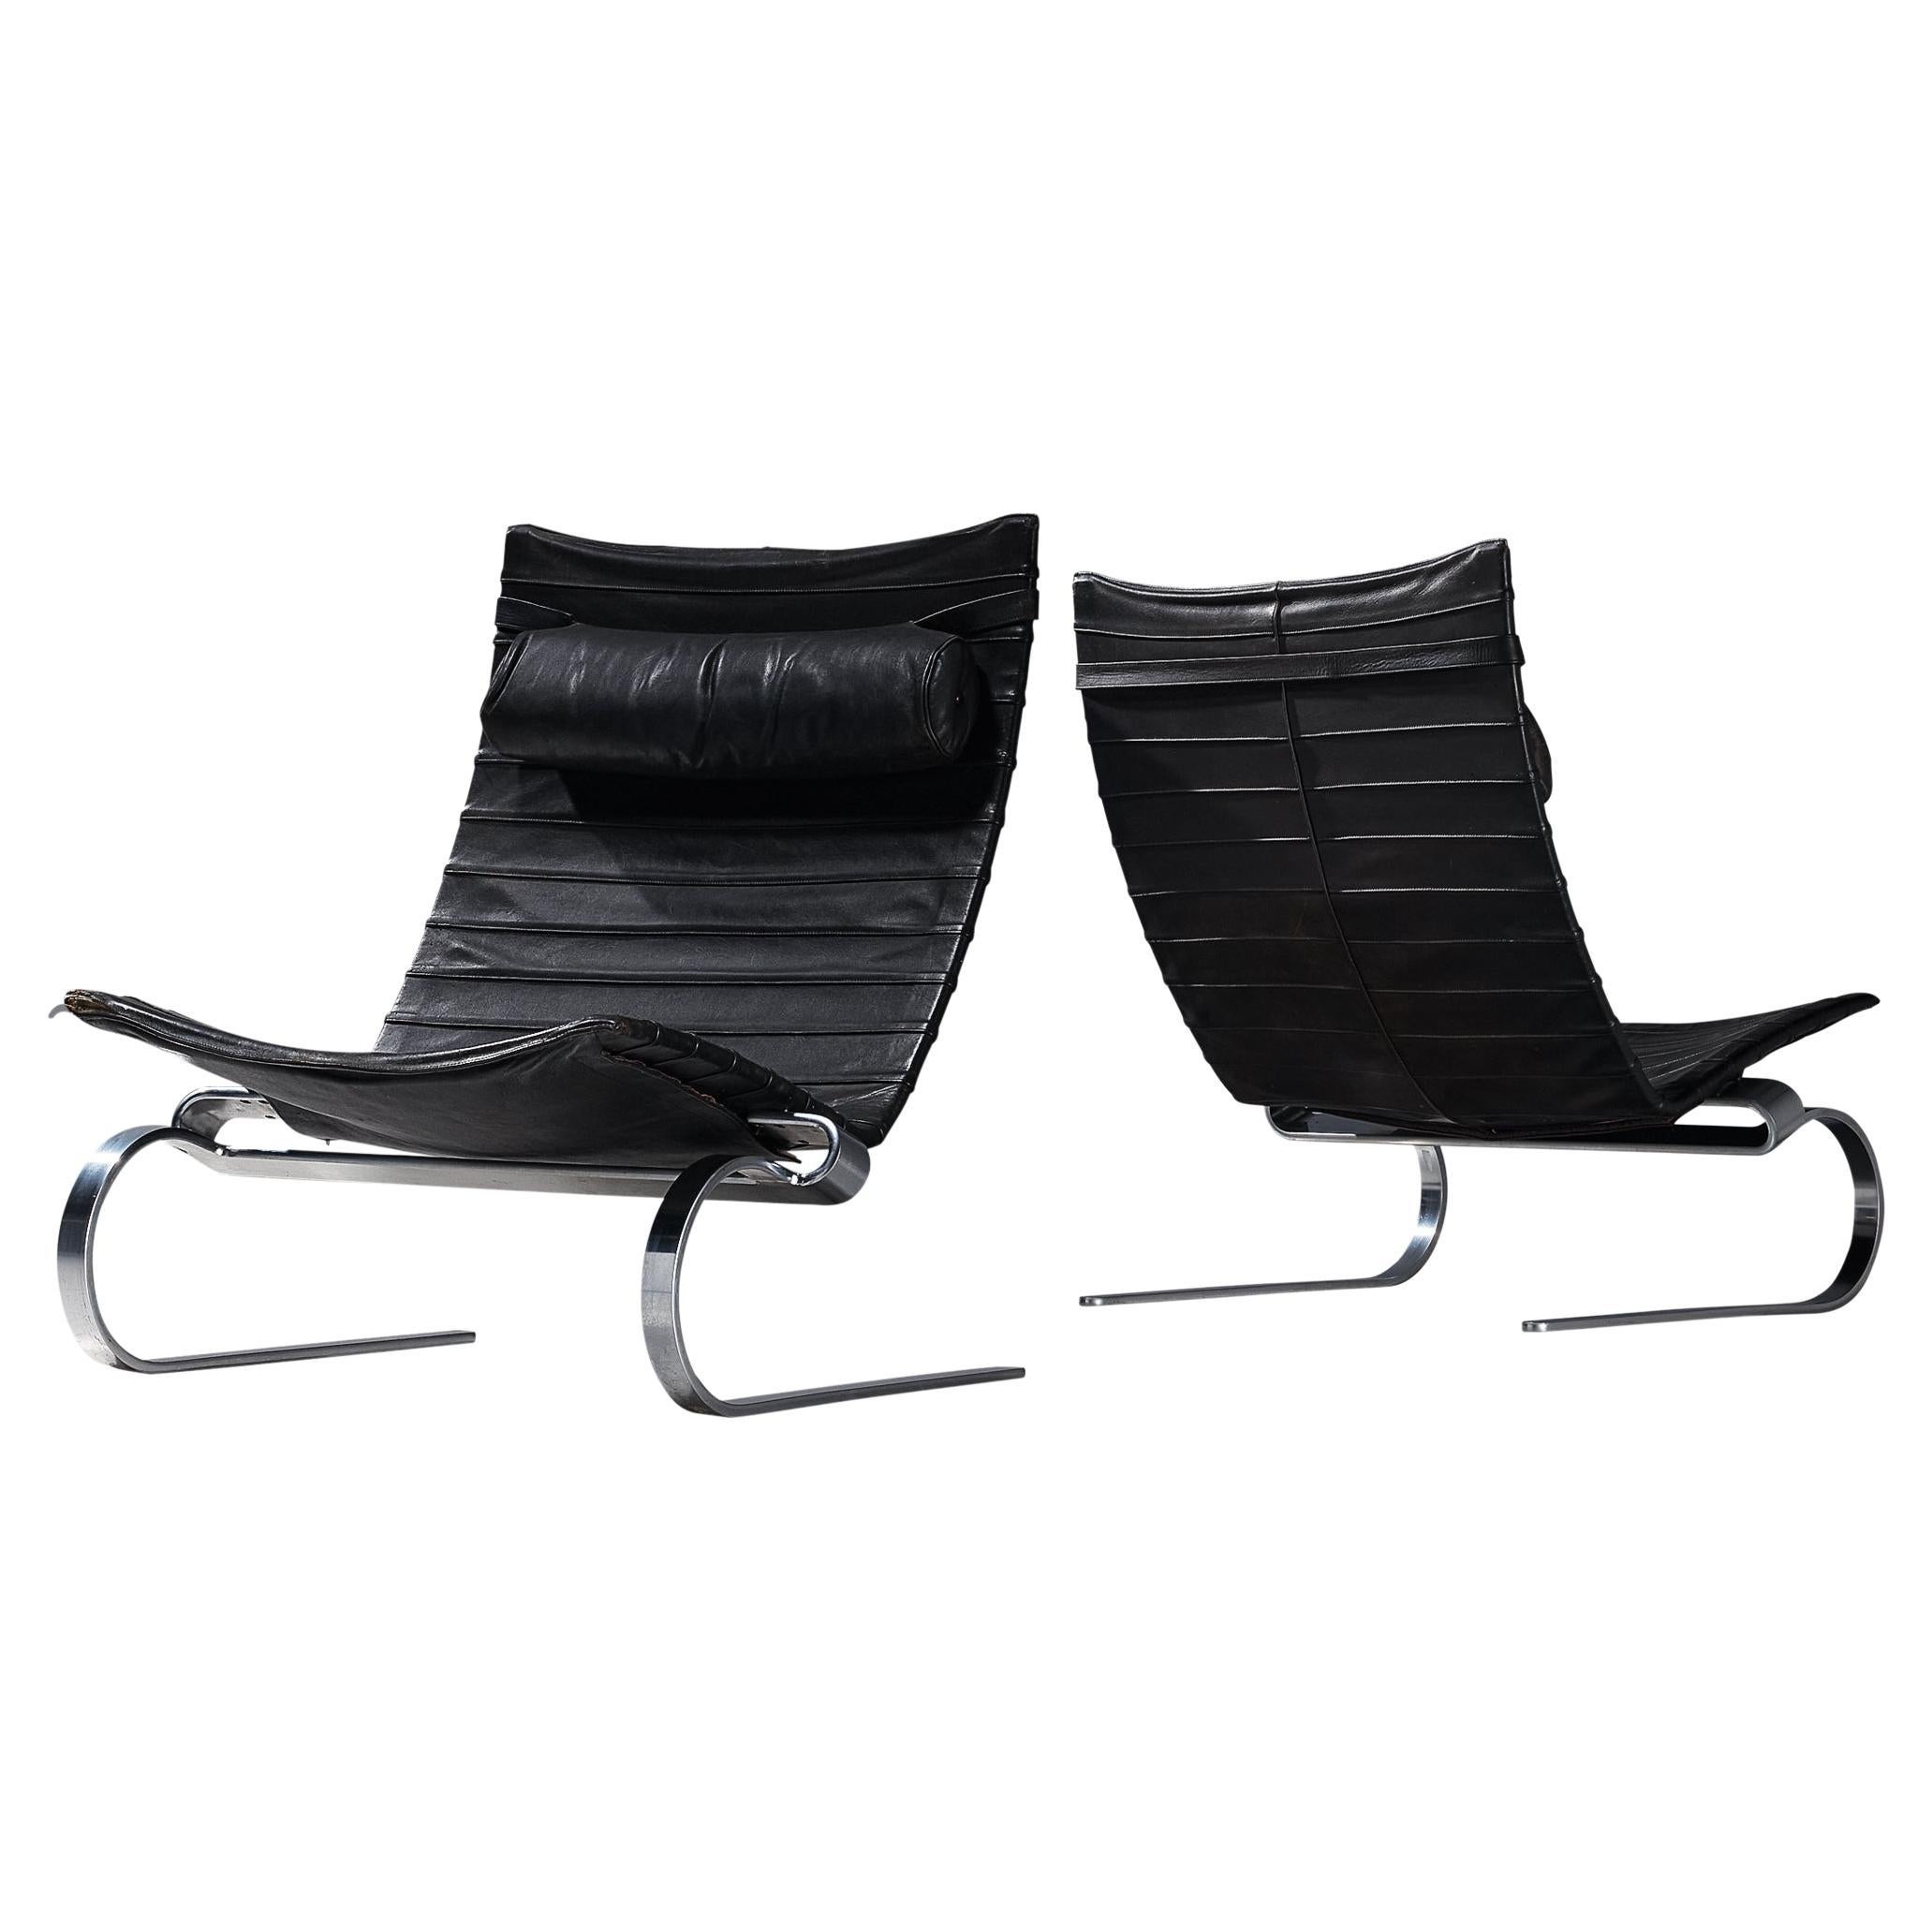 Poul Kjærholm for E. Kold Christensen Pair of 'PK20' Lounge Chairs in Leather